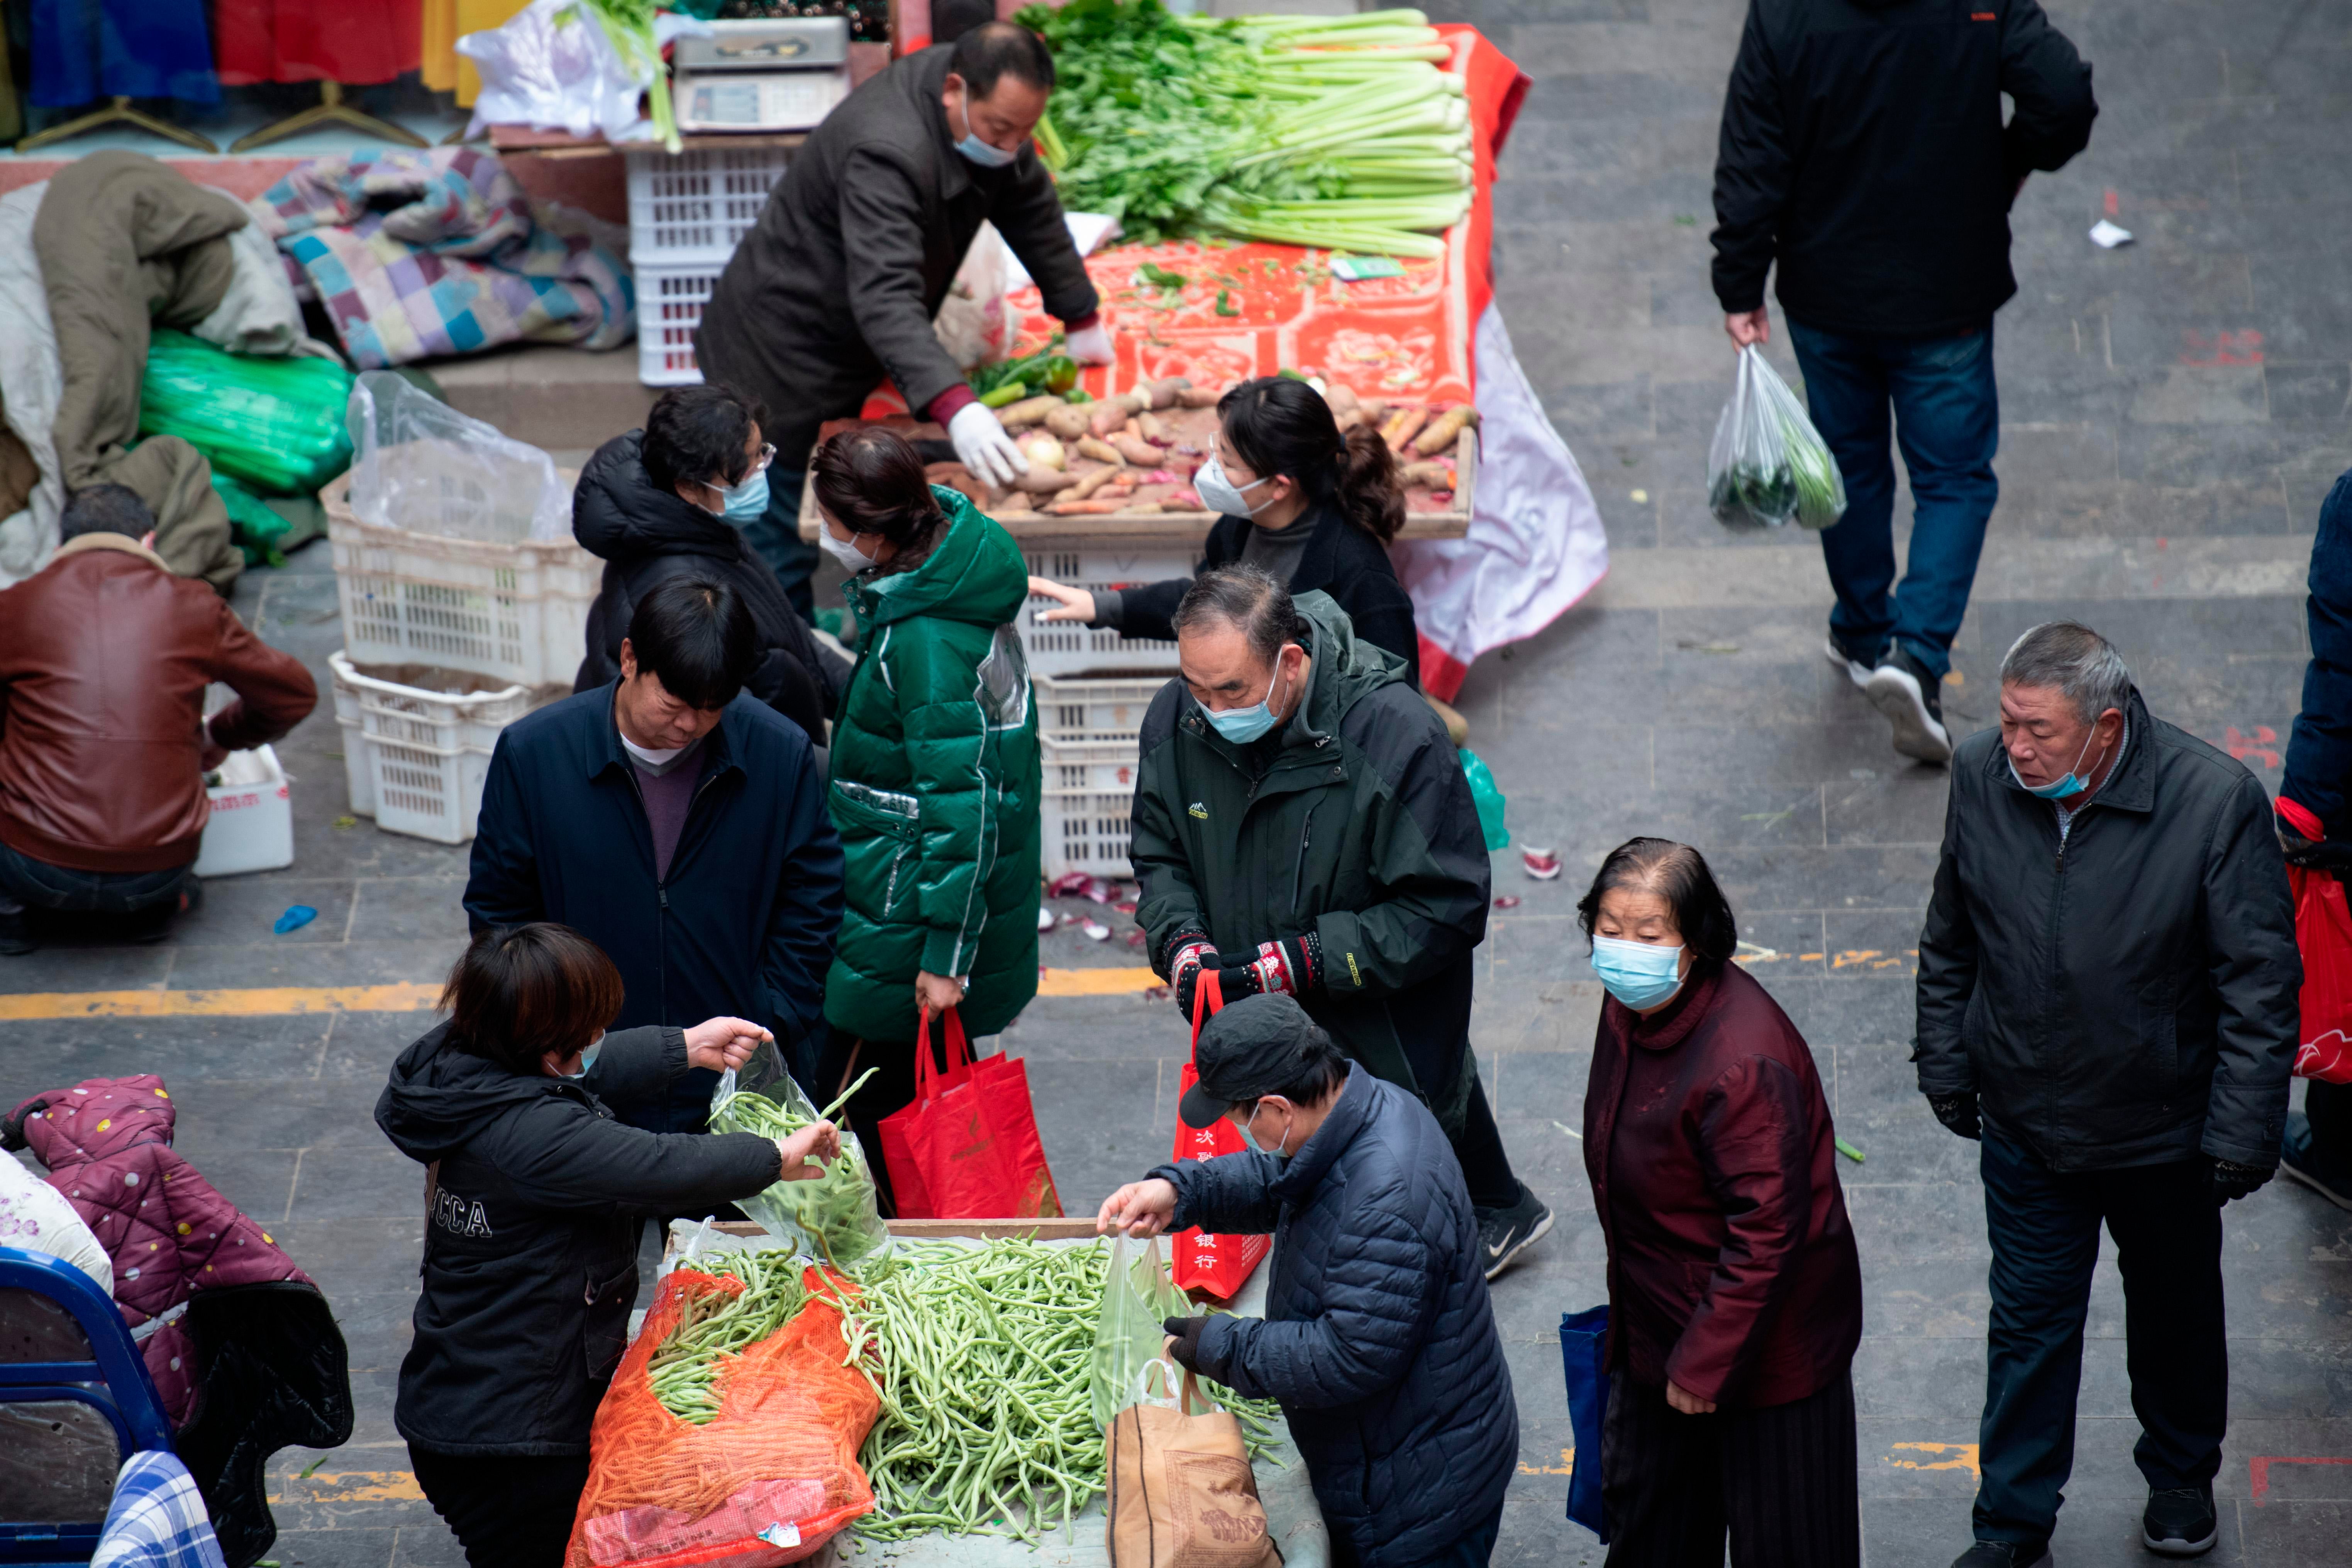 Citizens buy vegetables and food in Kaihua Temple Market in Taiyuan City, north China's Shanxi Province, December 7, 2022. (Photo: Imaginechina, AP)